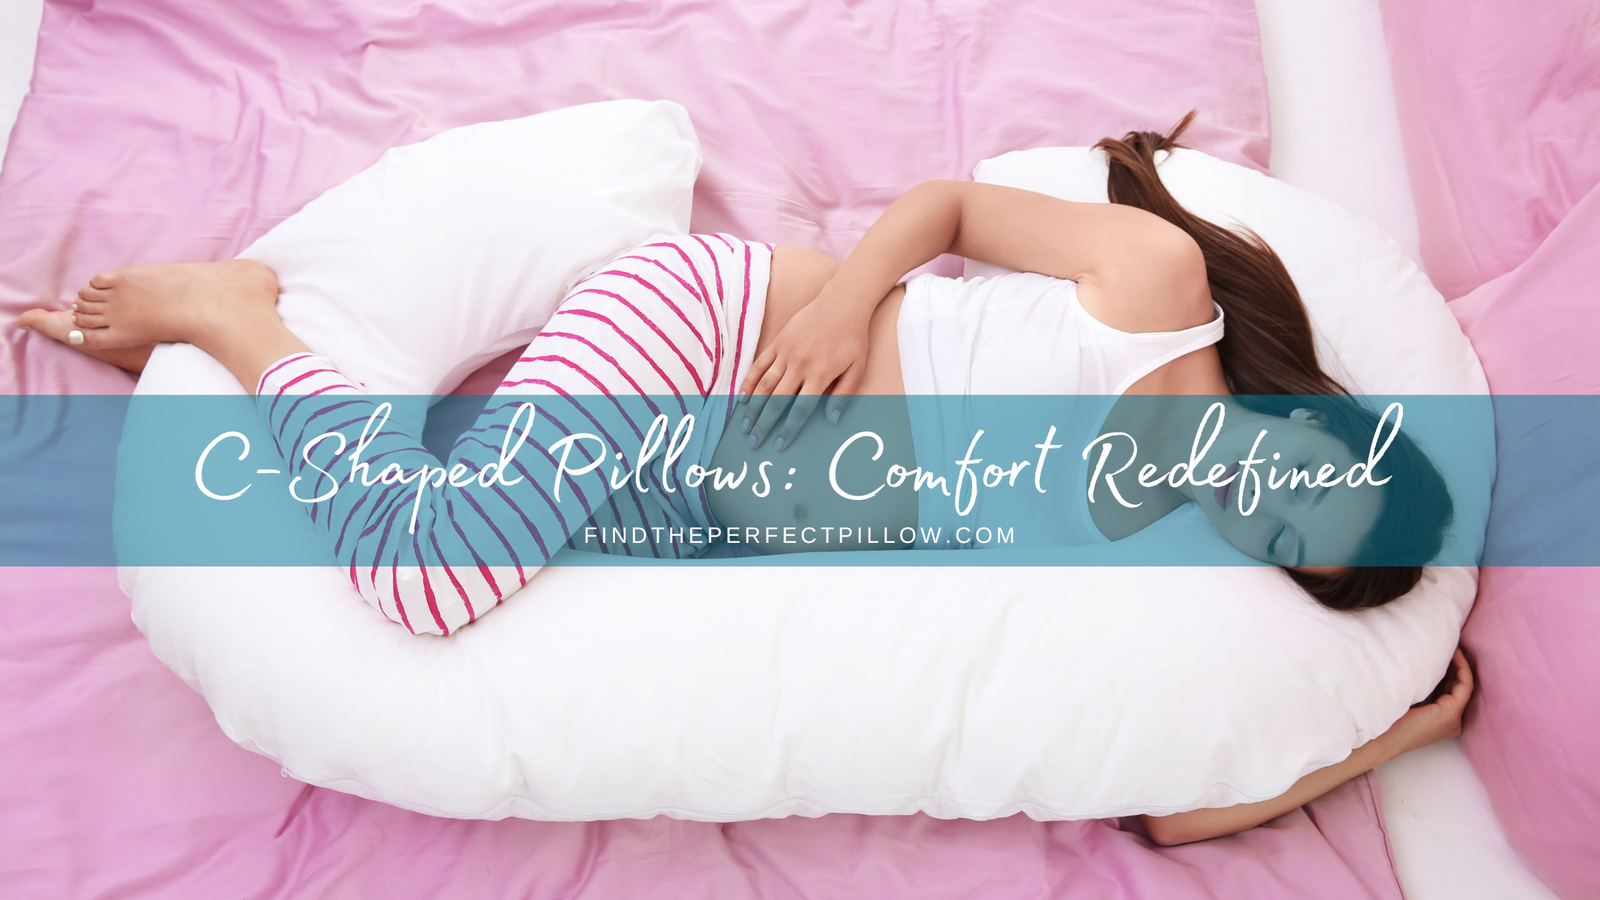 Young pregnant woman resting peacefully on a C-shaped maternity pillow in bed with pink sheets, showcasing the 'C-Shaped Pillows: Comfort Redefined' concept from FindThePerfectPillow.com.